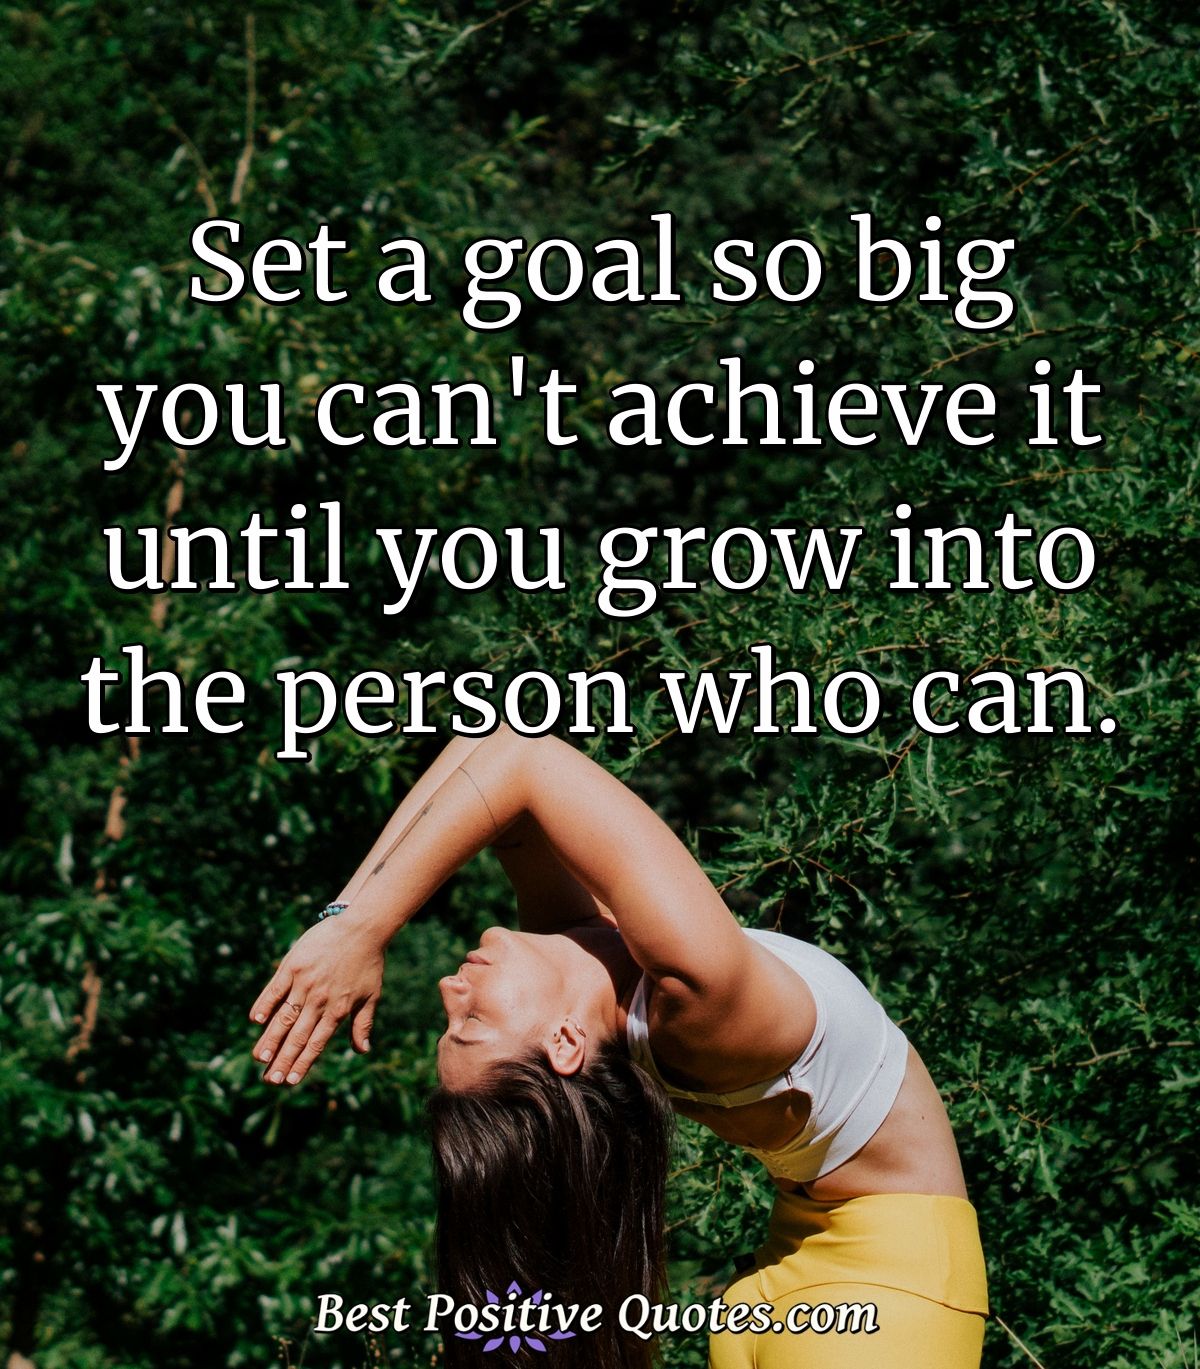 Set a goal so big you can't achieve it until you grow into the person who can. - Anonymous